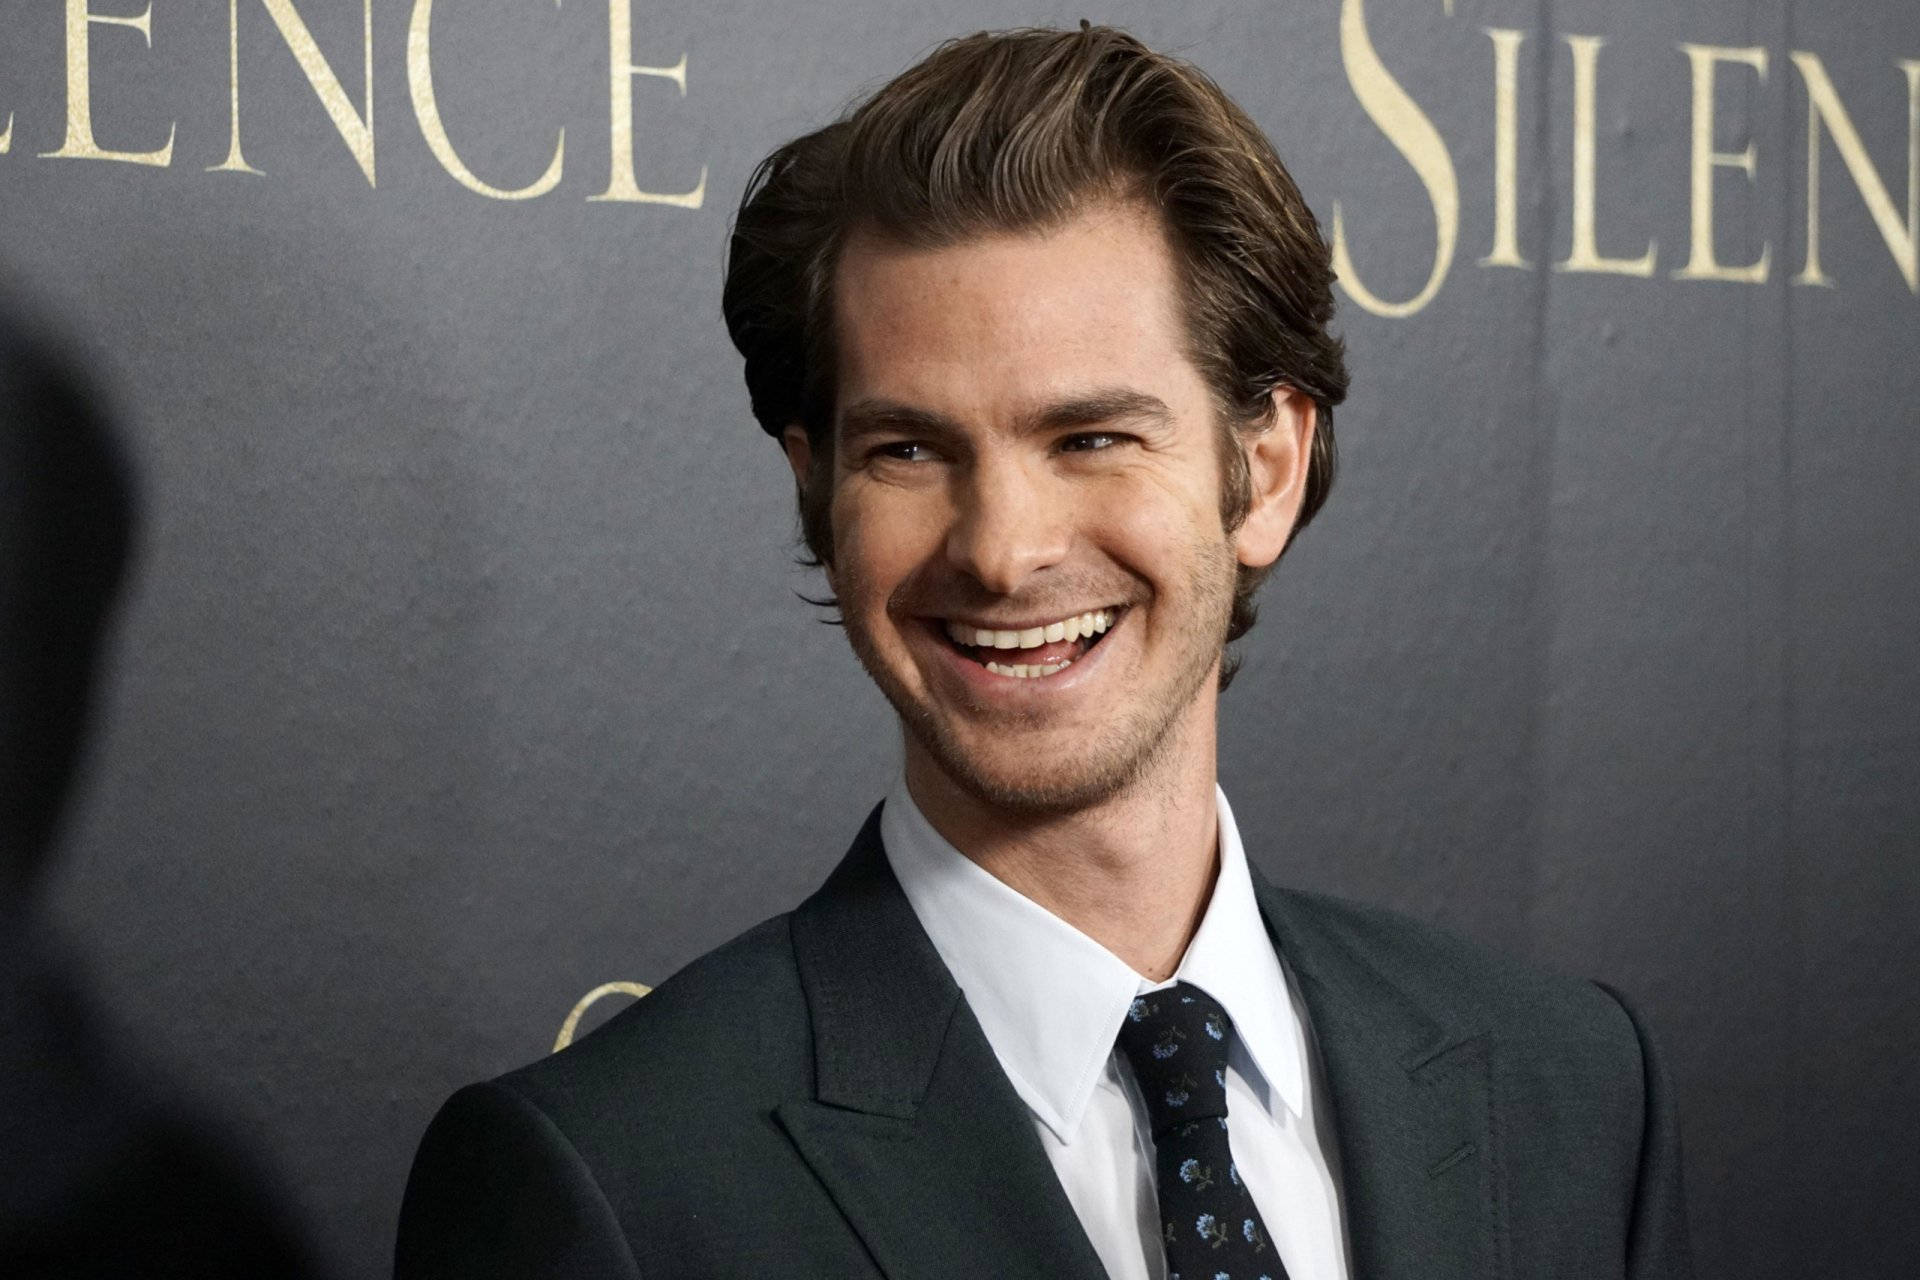 Andrew Garfield At Silence Film Premiere Background